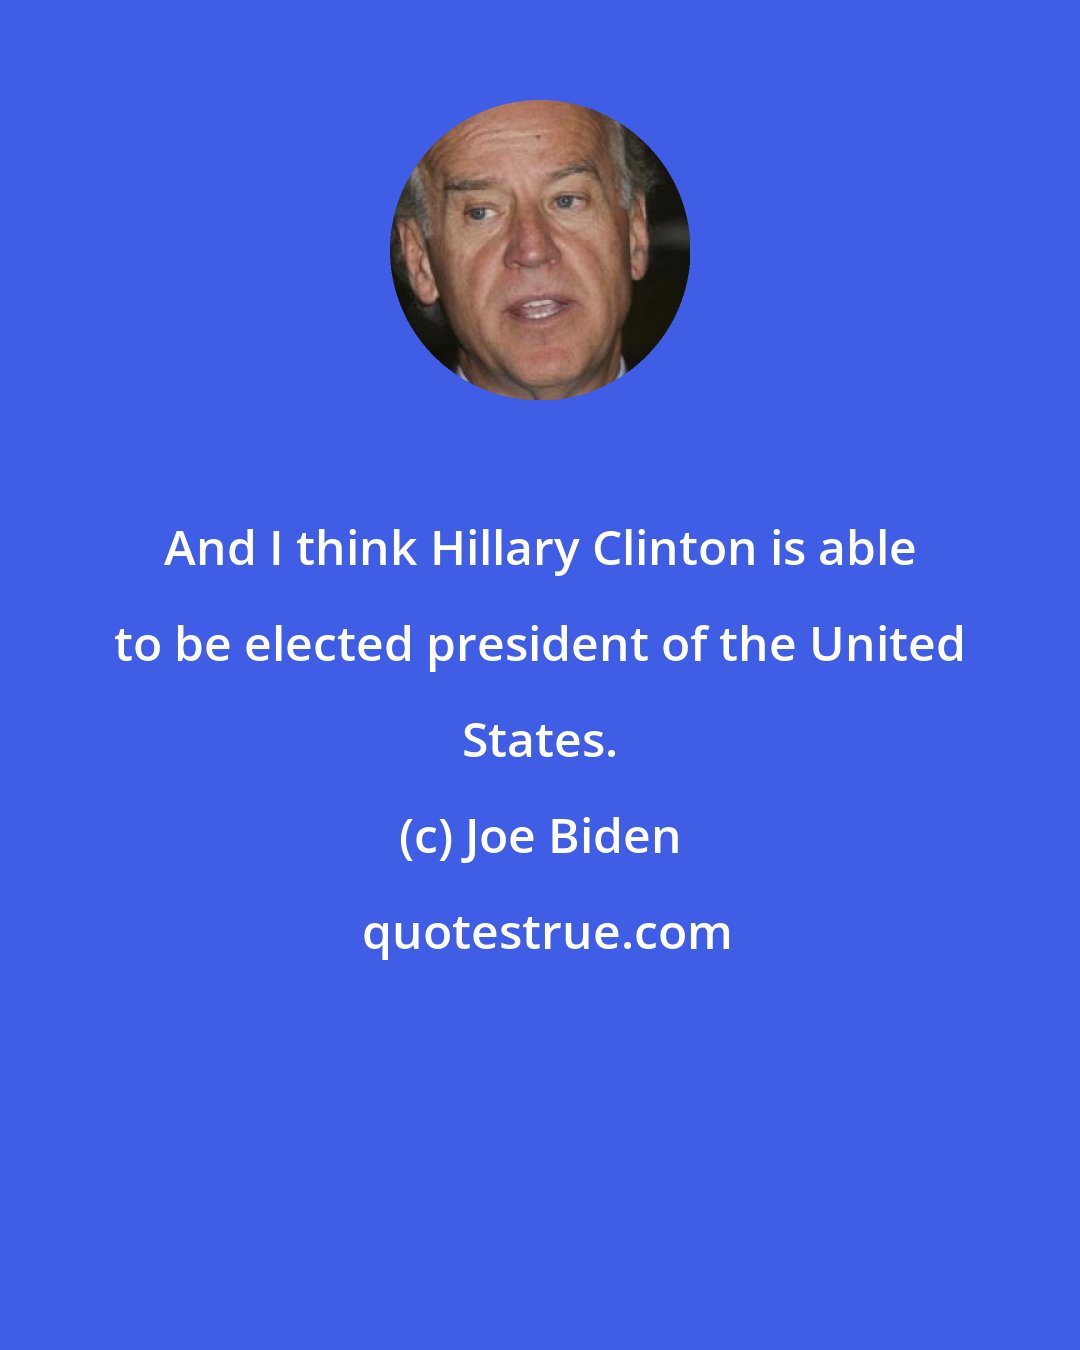 Joe Biden: And I think Hillary Clinton is able to be elected president of the United States.